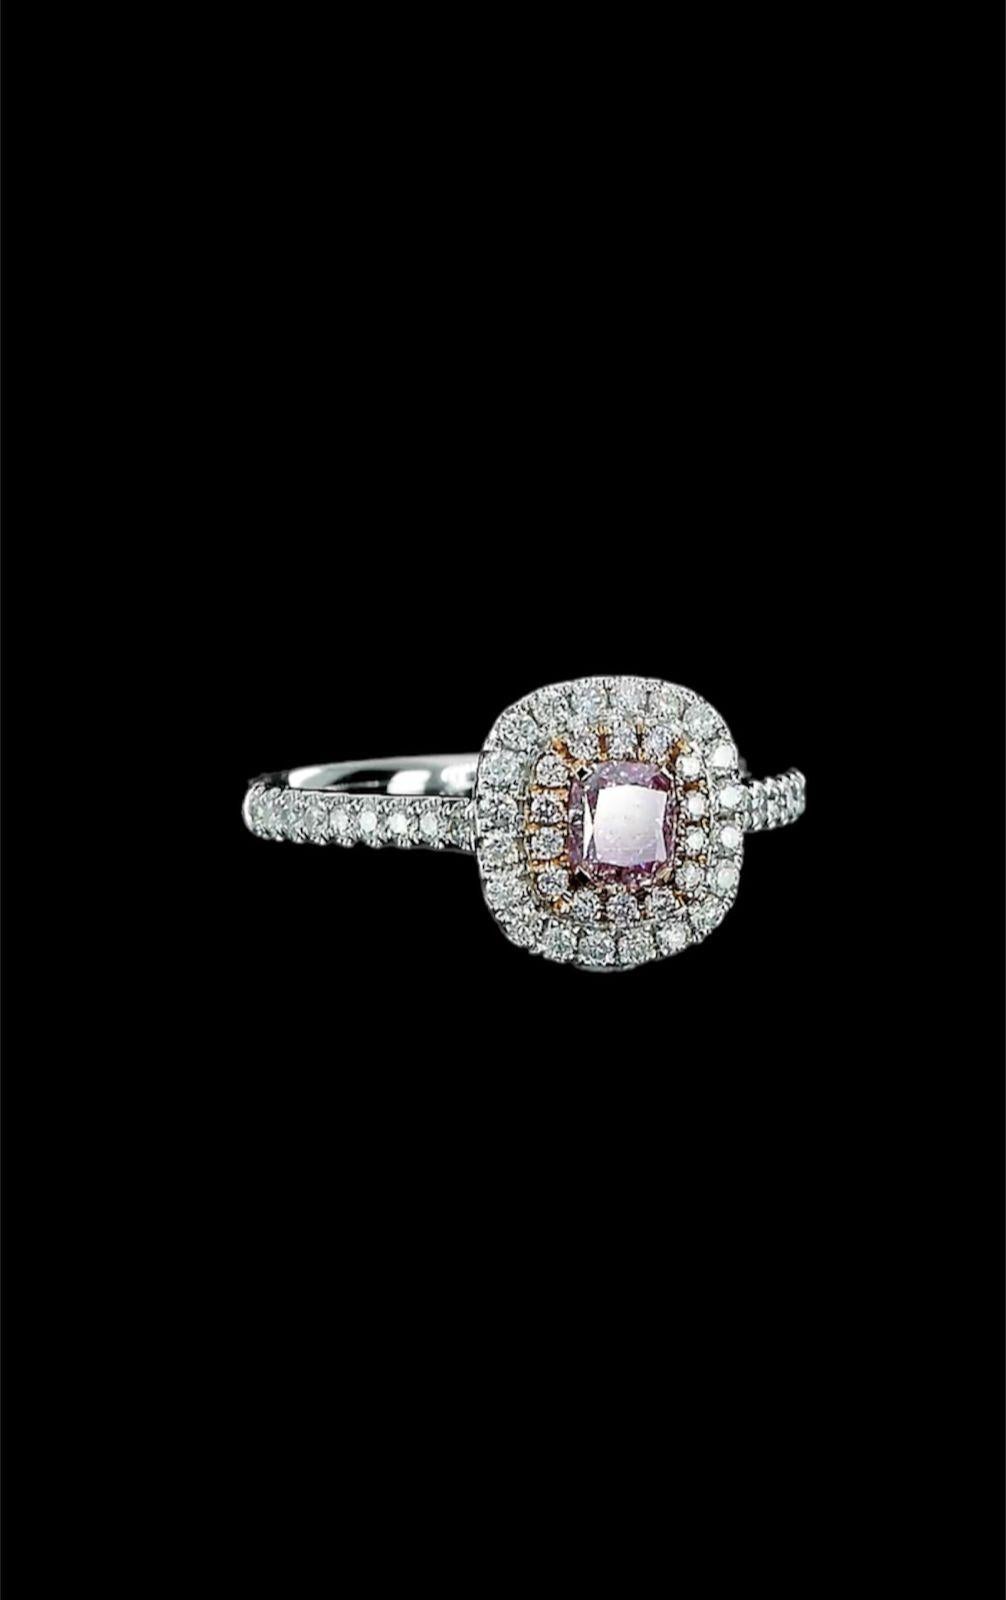 GIA Certified 0.33 Carat Faint Pink Diamond Ring SI2 Clarity For Sale 1